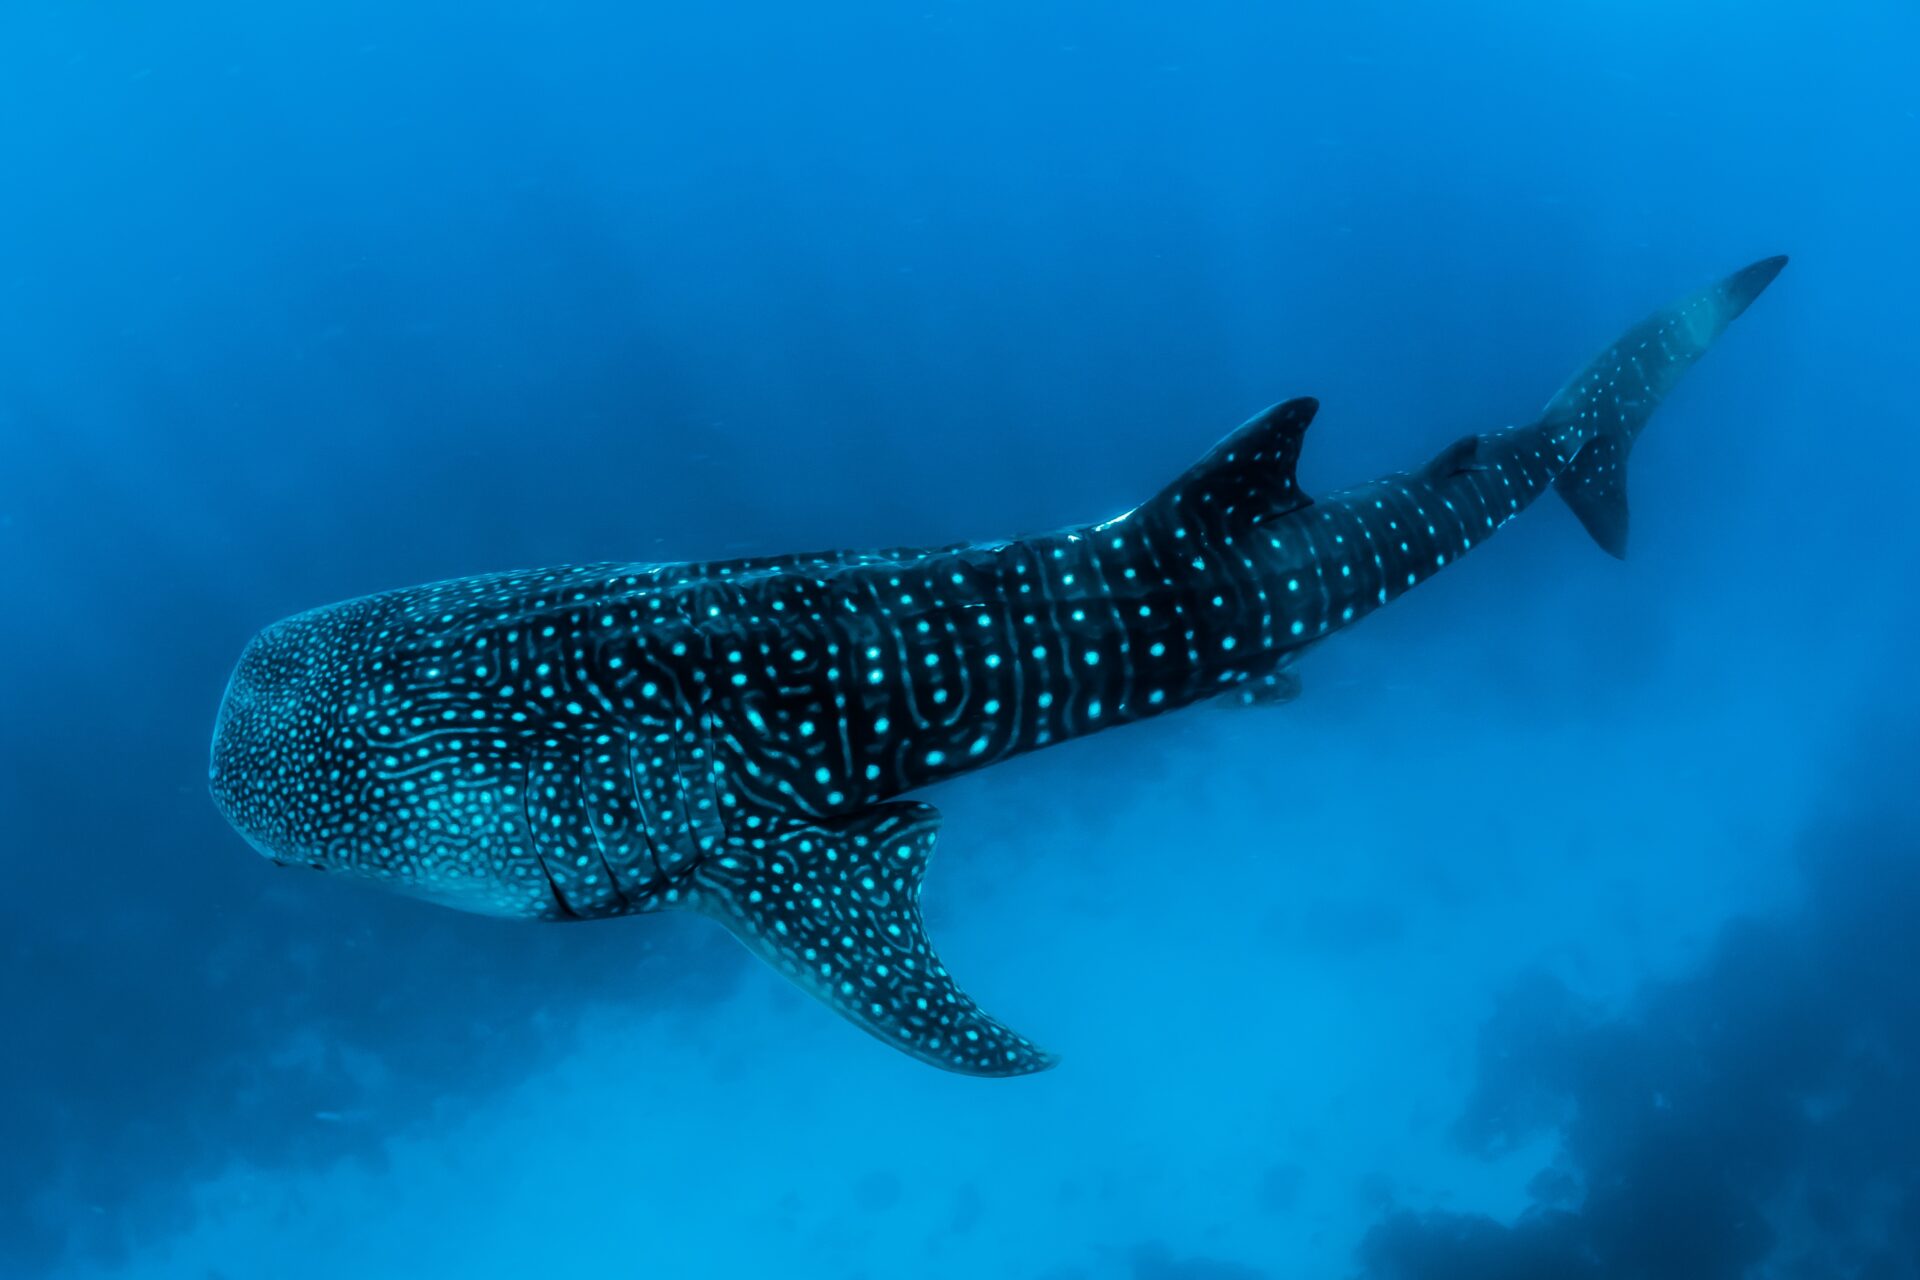 We have a top-down view of a whale shark. Its whole body fits in the image. One fact about whale sharks is that their coloration of white dots and lines (which we can see clearly against their dark skin in this photo) is leftover from their ancestors.